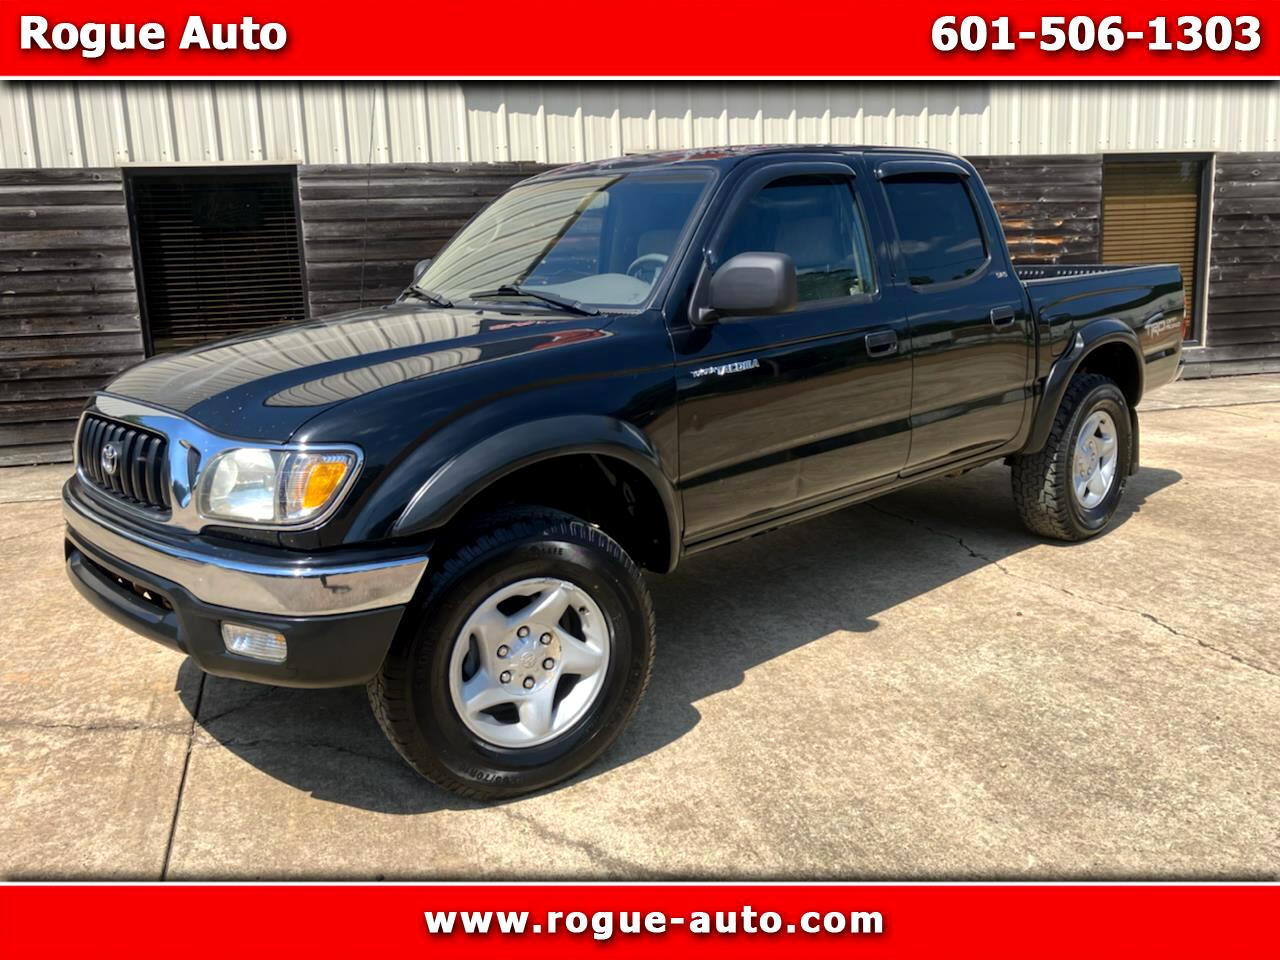 2003 Toyota Tacoma DOUBLE CAB PRERUNNER